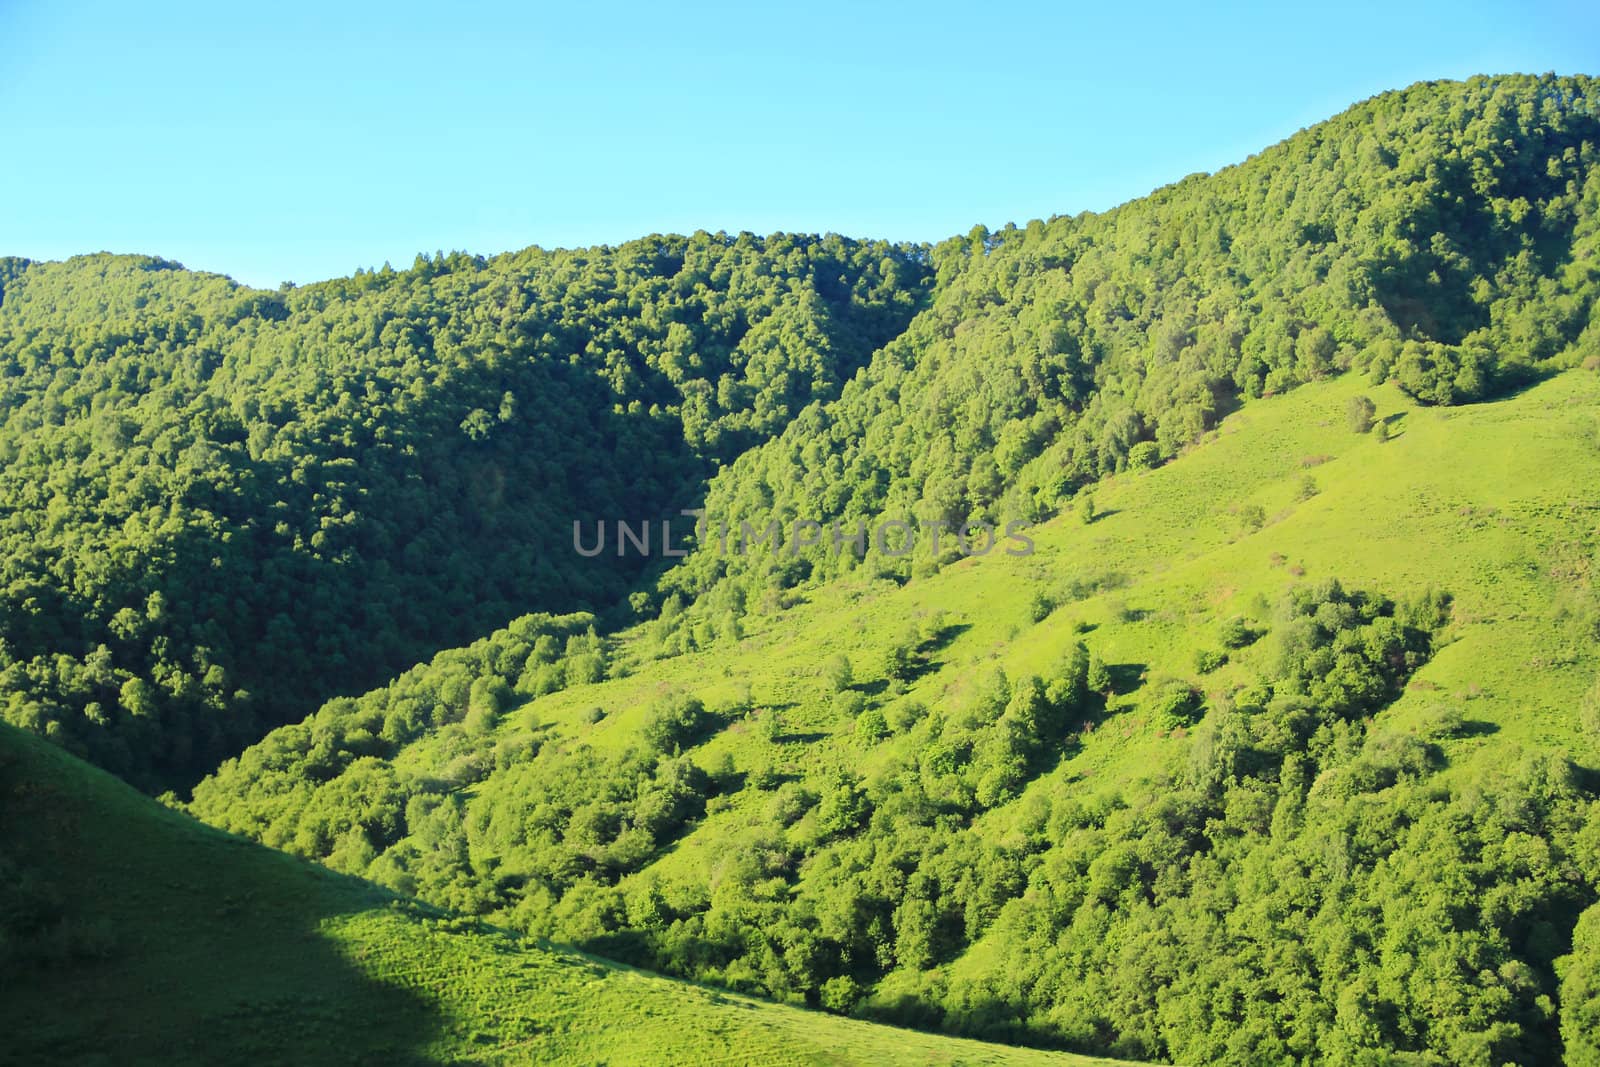 Summer beautiful landscape with Caucasus green mountains